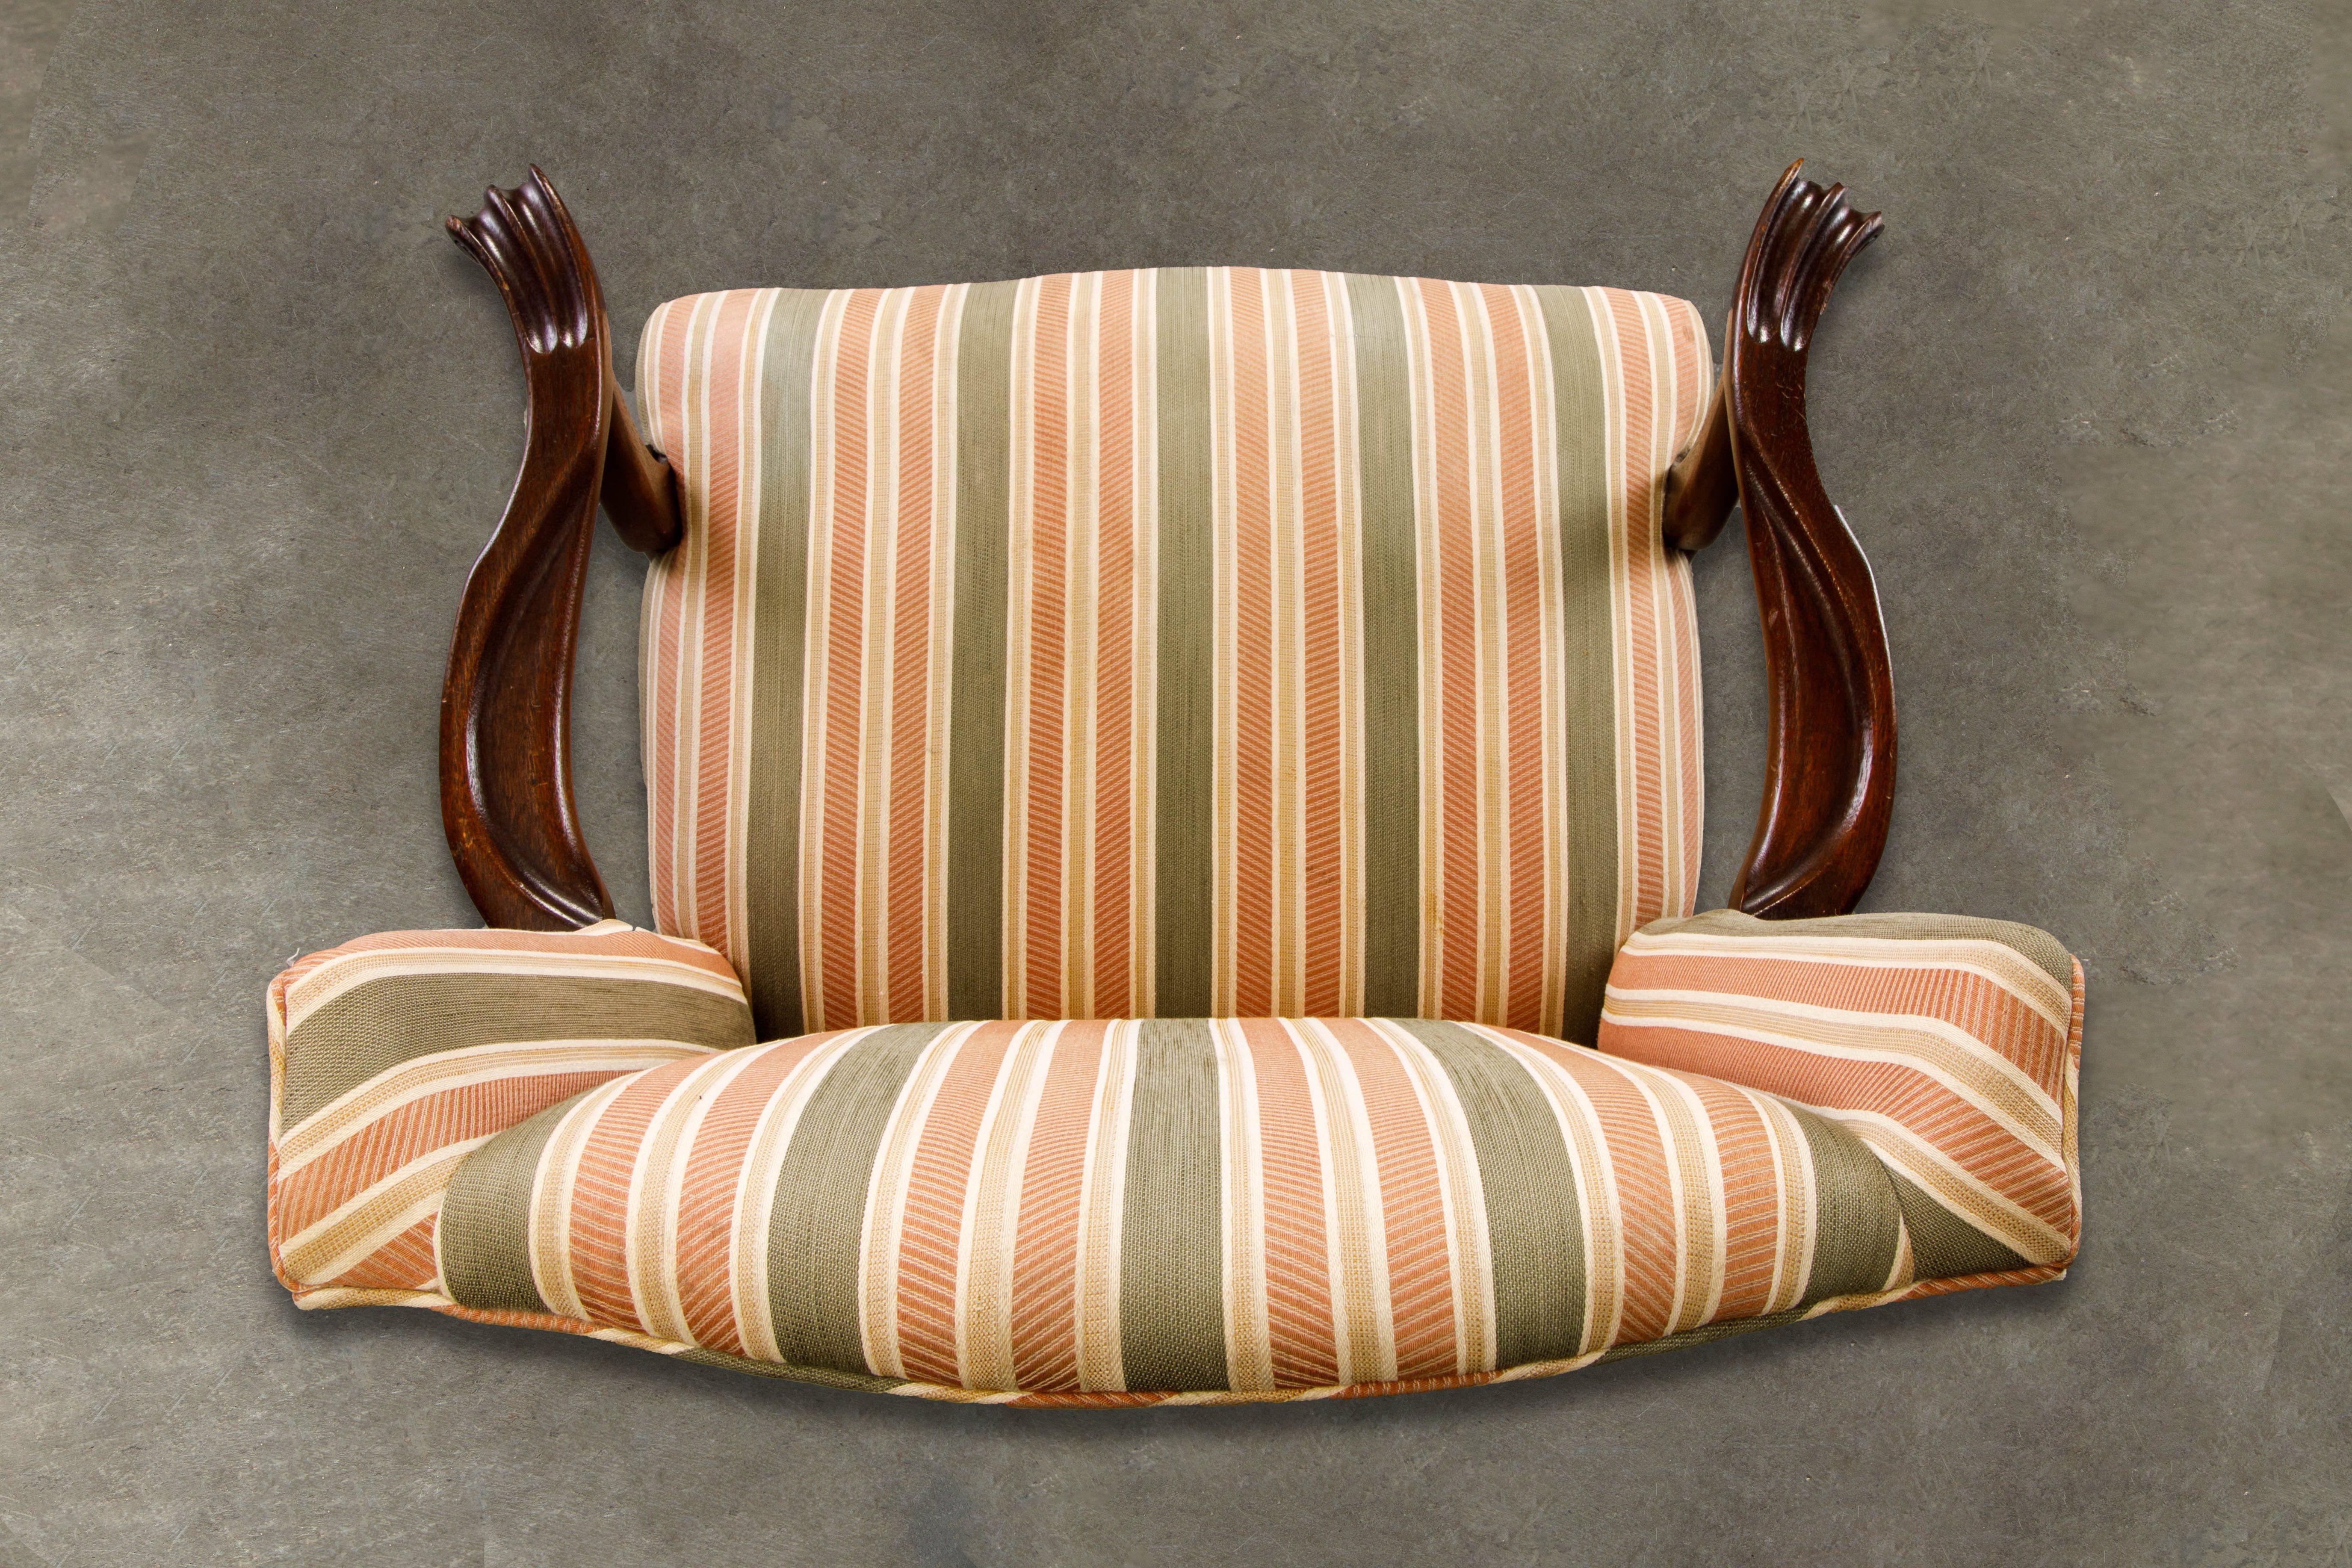 Gainsborough Wingback Armchair Upholstered in Striped Fabric 12